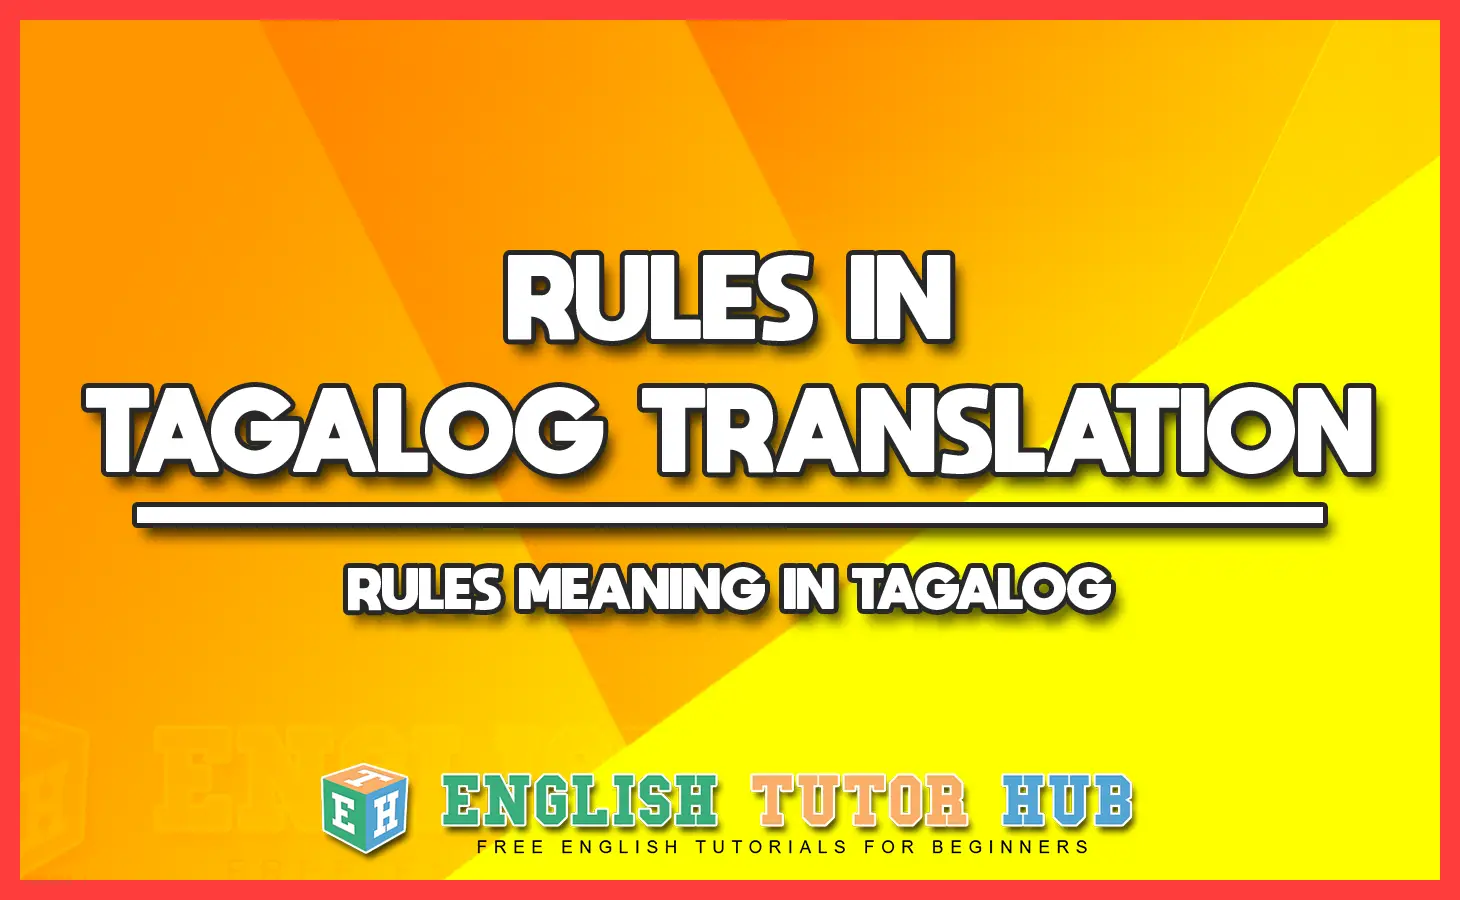 RULES IN TAGALOG TRANSLATION RULES MEANING IN TAGALOG 